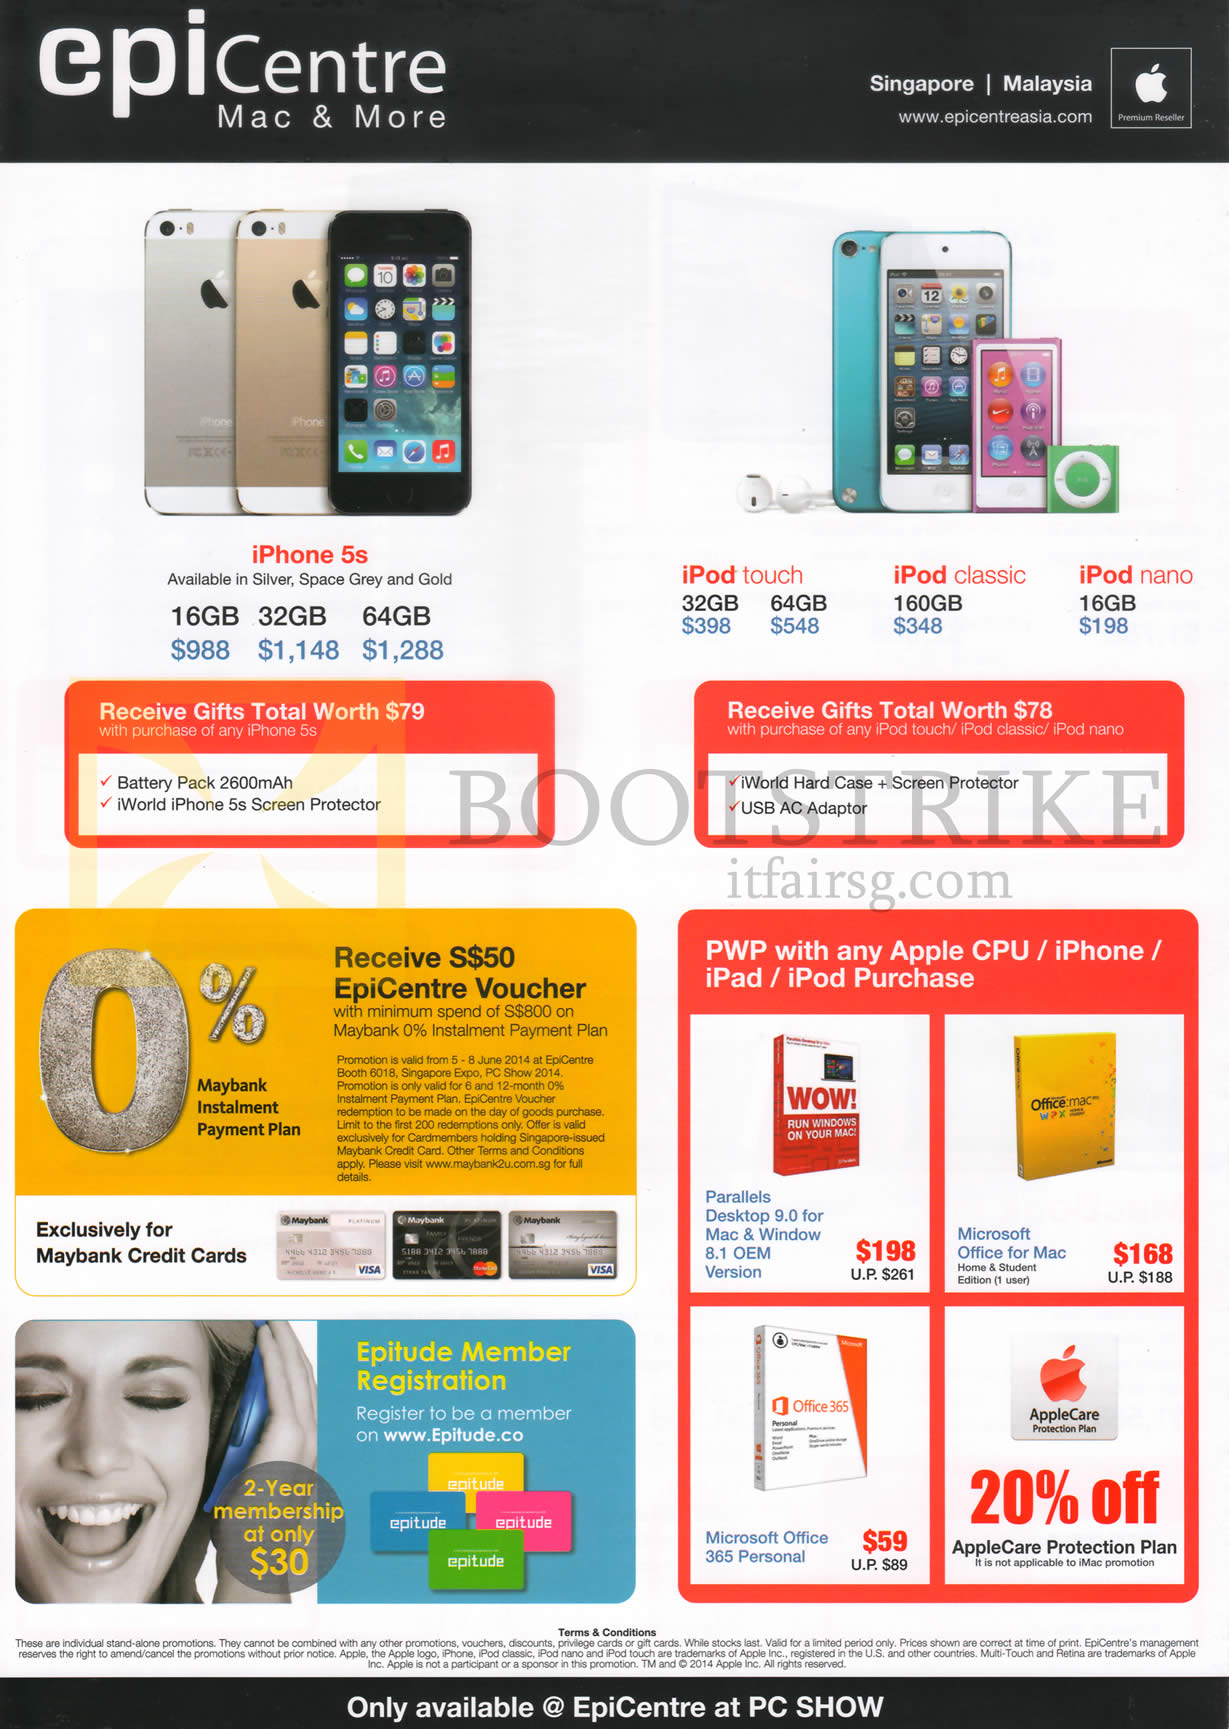 PC SHOW 2014 price list image brochure of EpiCentre Apple Mobile Phones IPhone 5S, IPod Touch, Classic, Nano, Parallels, Office 365